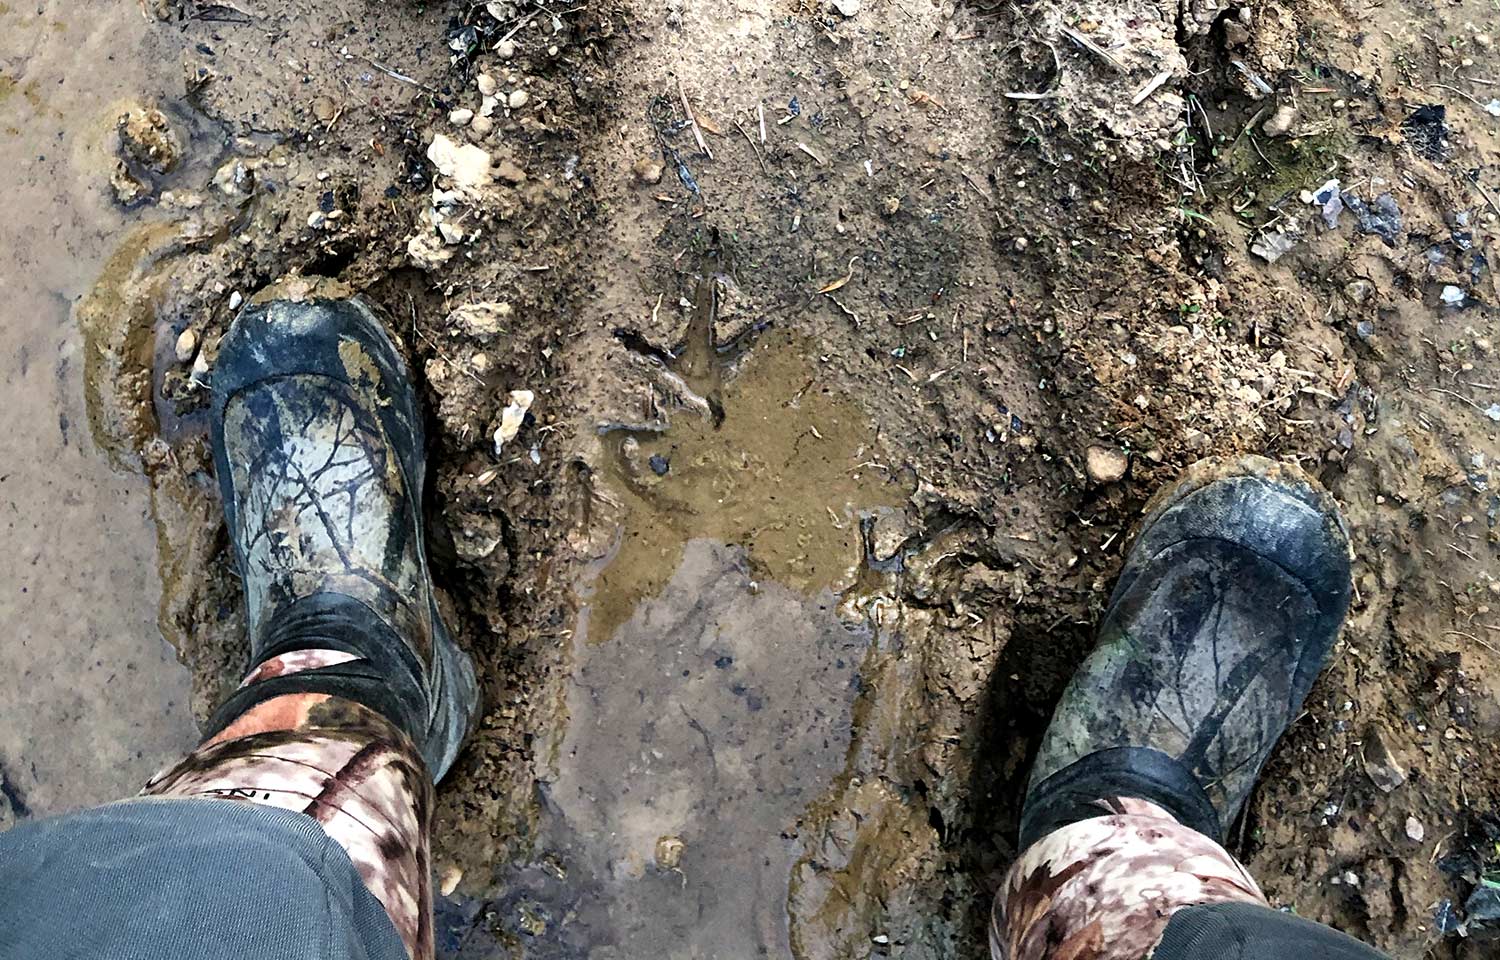 A hunters boots and turkey tracks in the mud.